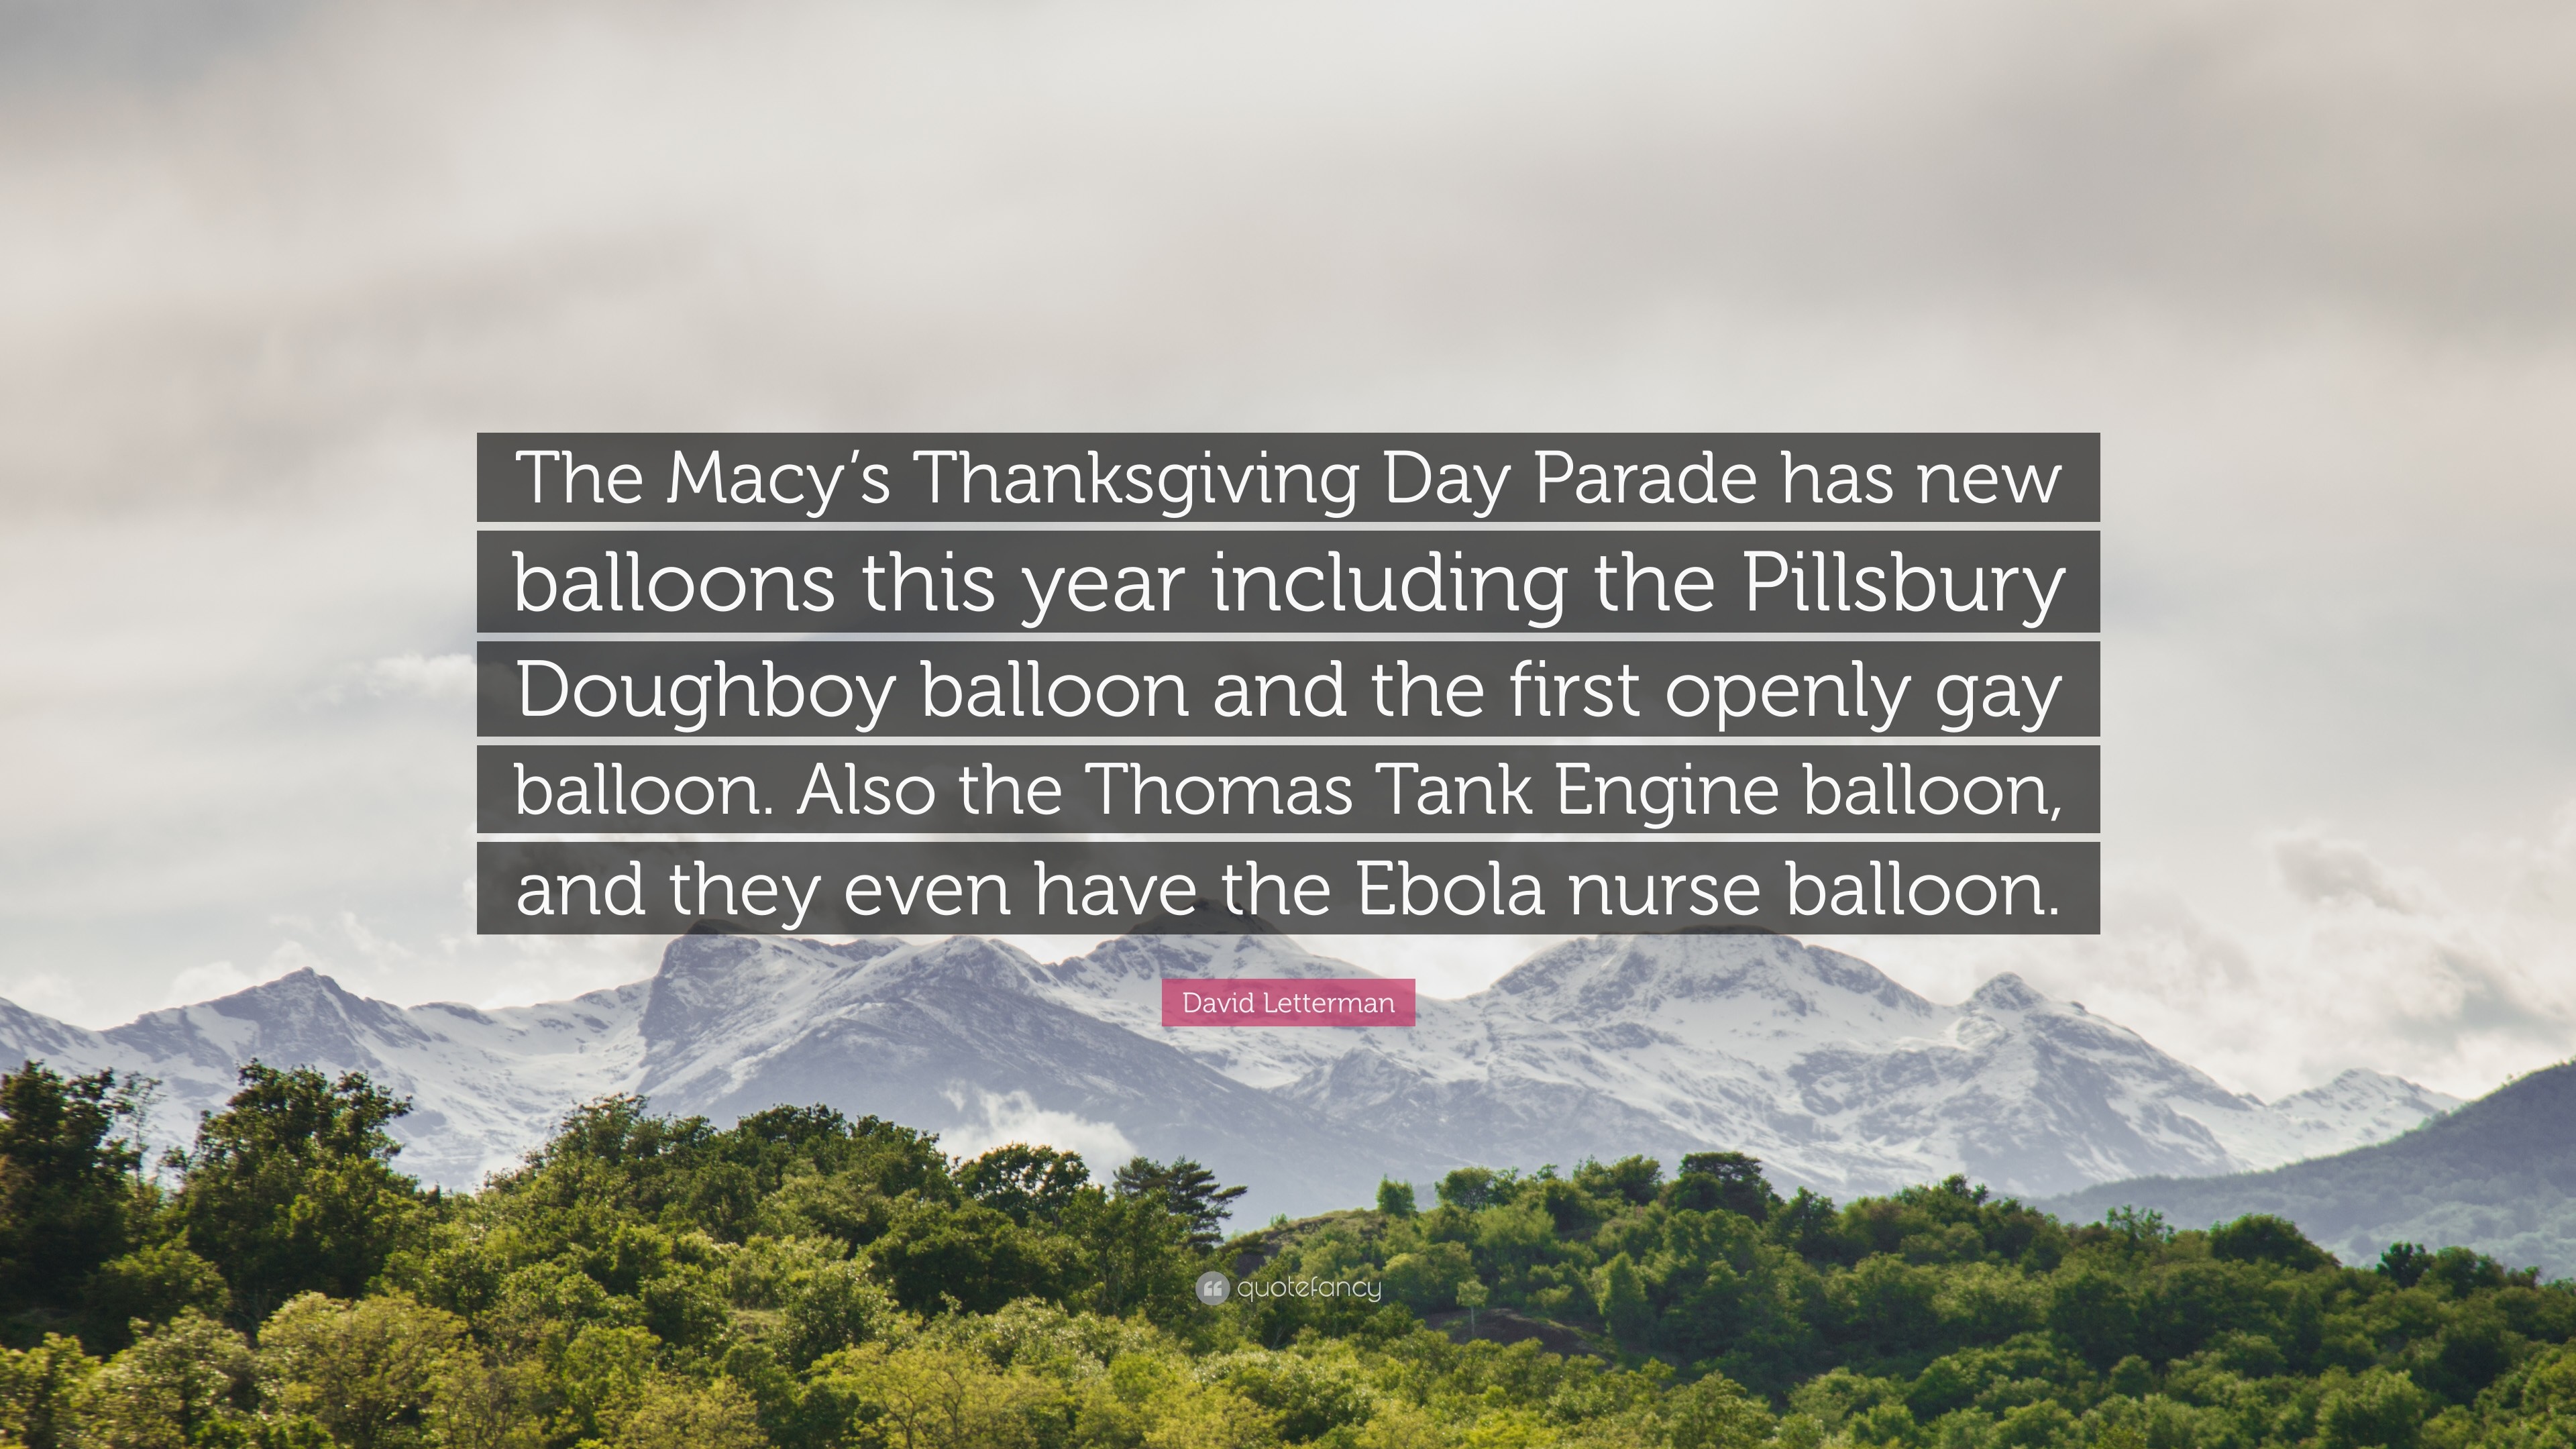 3840x2160 David Letterman Quote: “The Macy's Thanksgiving Day Parade has new balloons  this year including